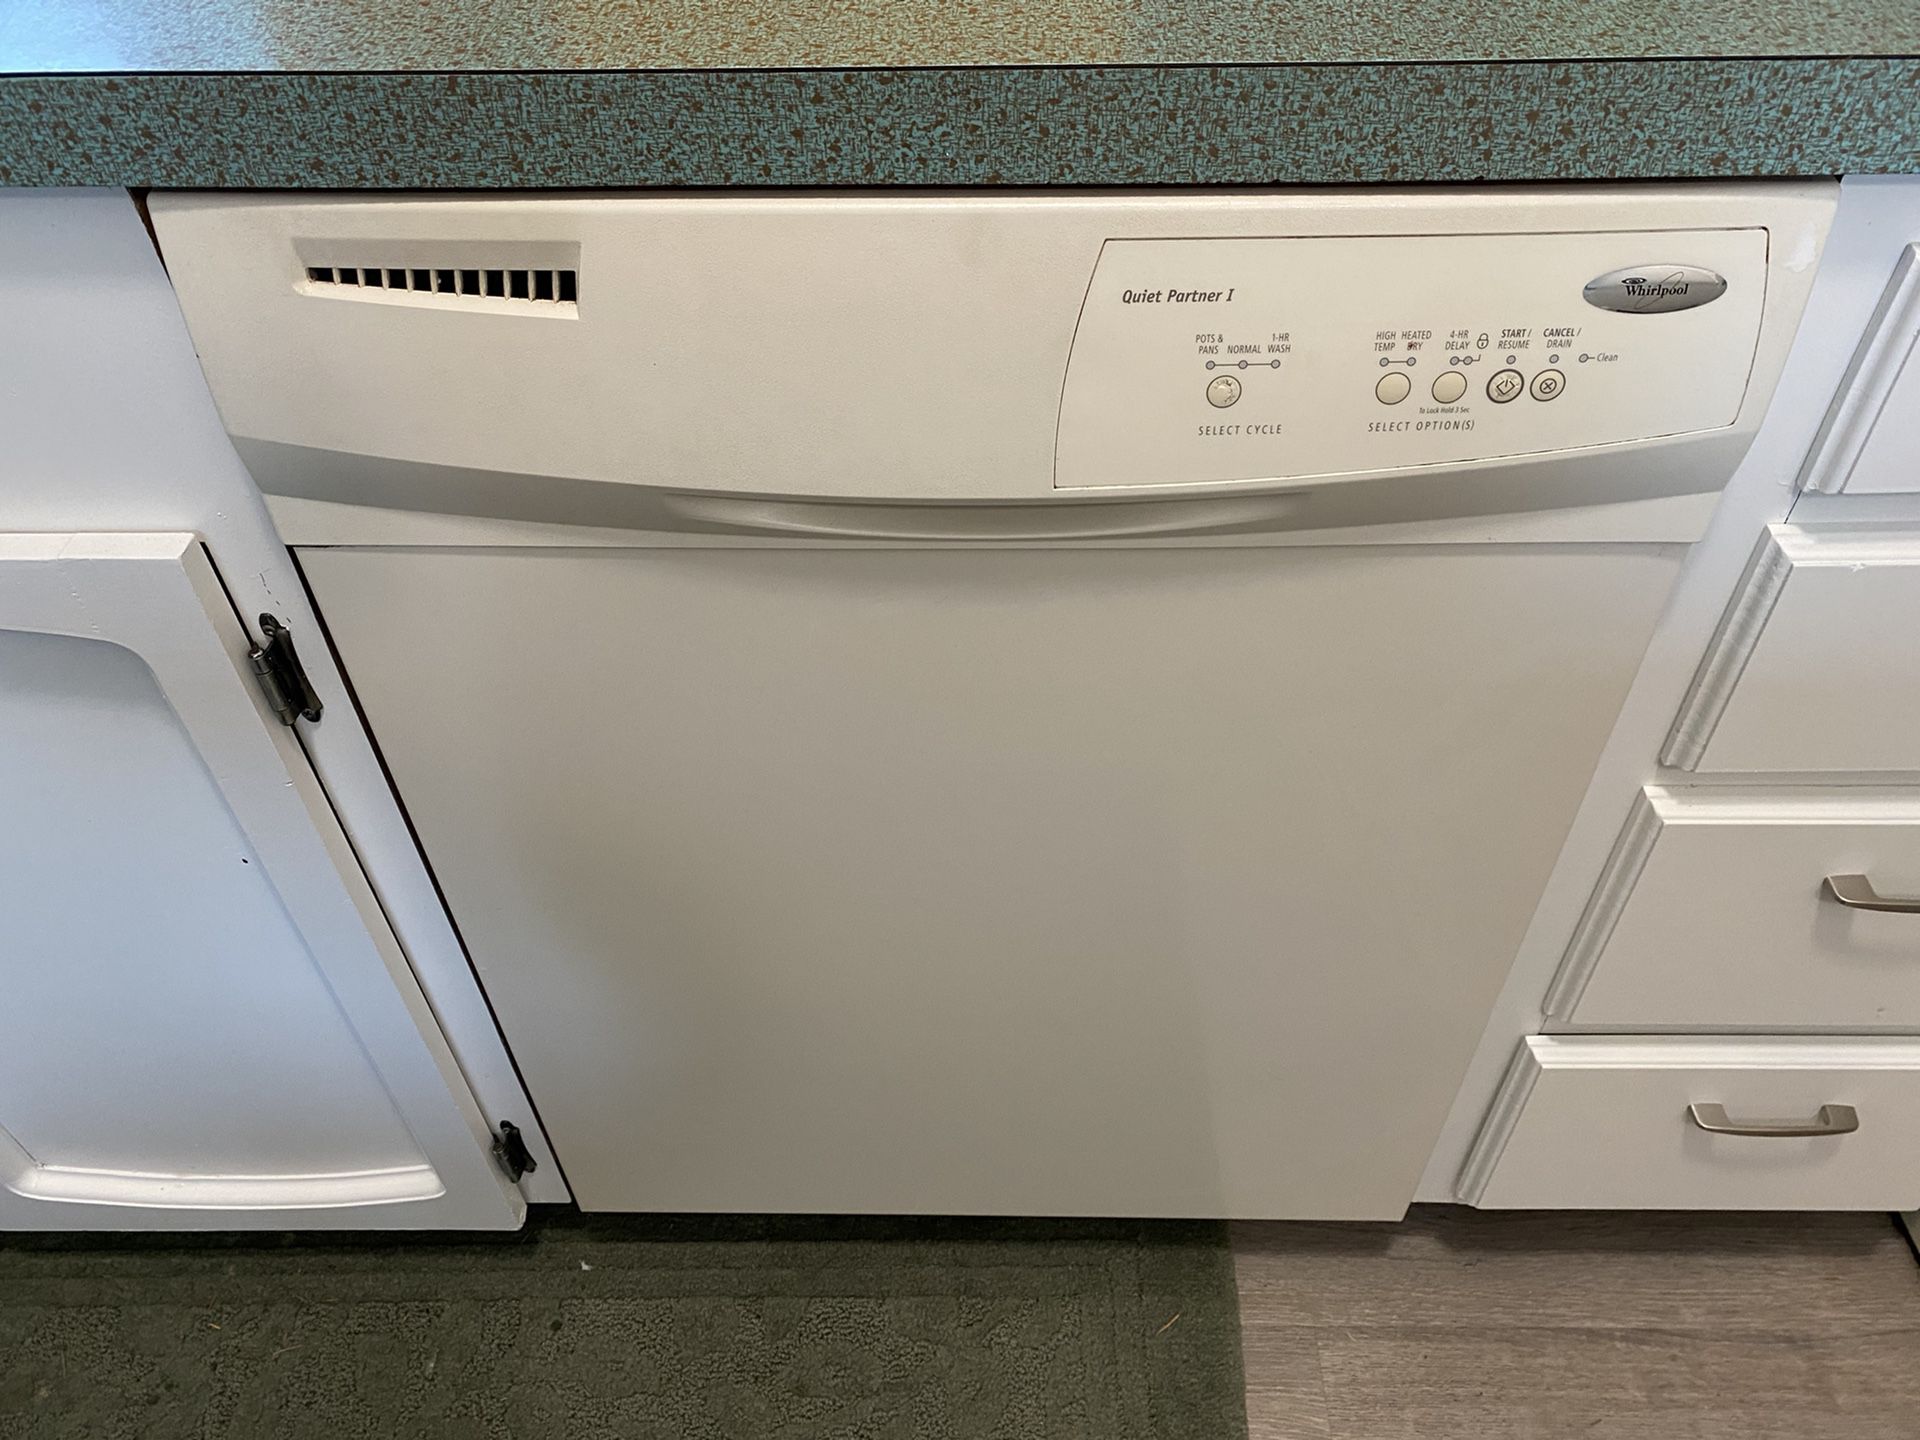 How To Fix The Error Code 45018 For Whirlpool Dishwasher